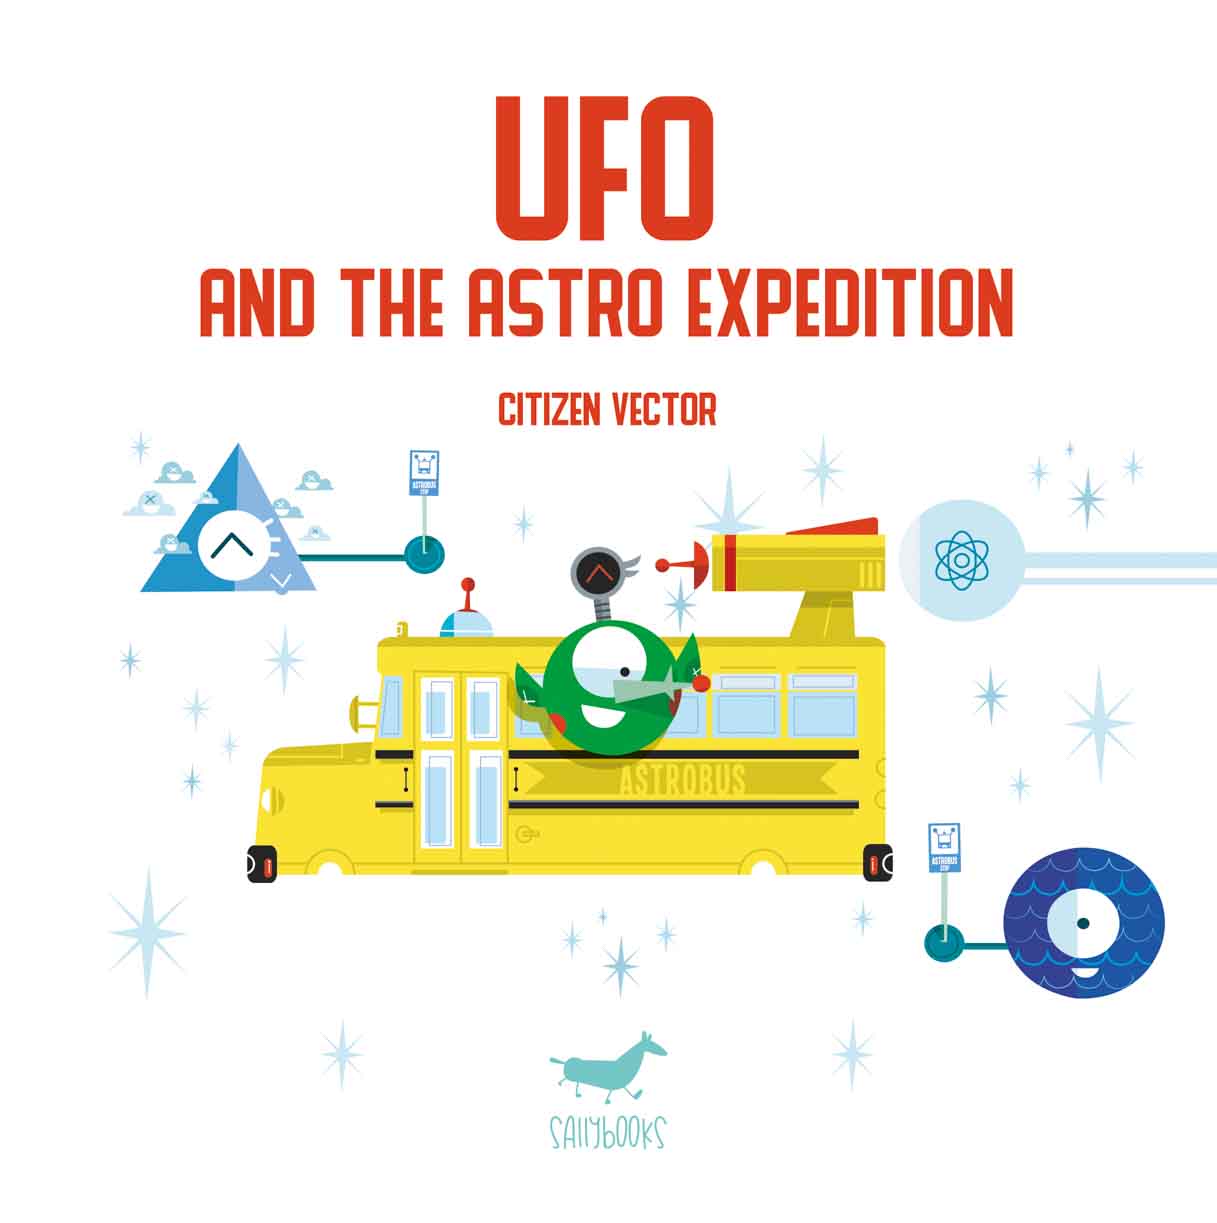 UFO AND THE ASTRO EXPEDITION